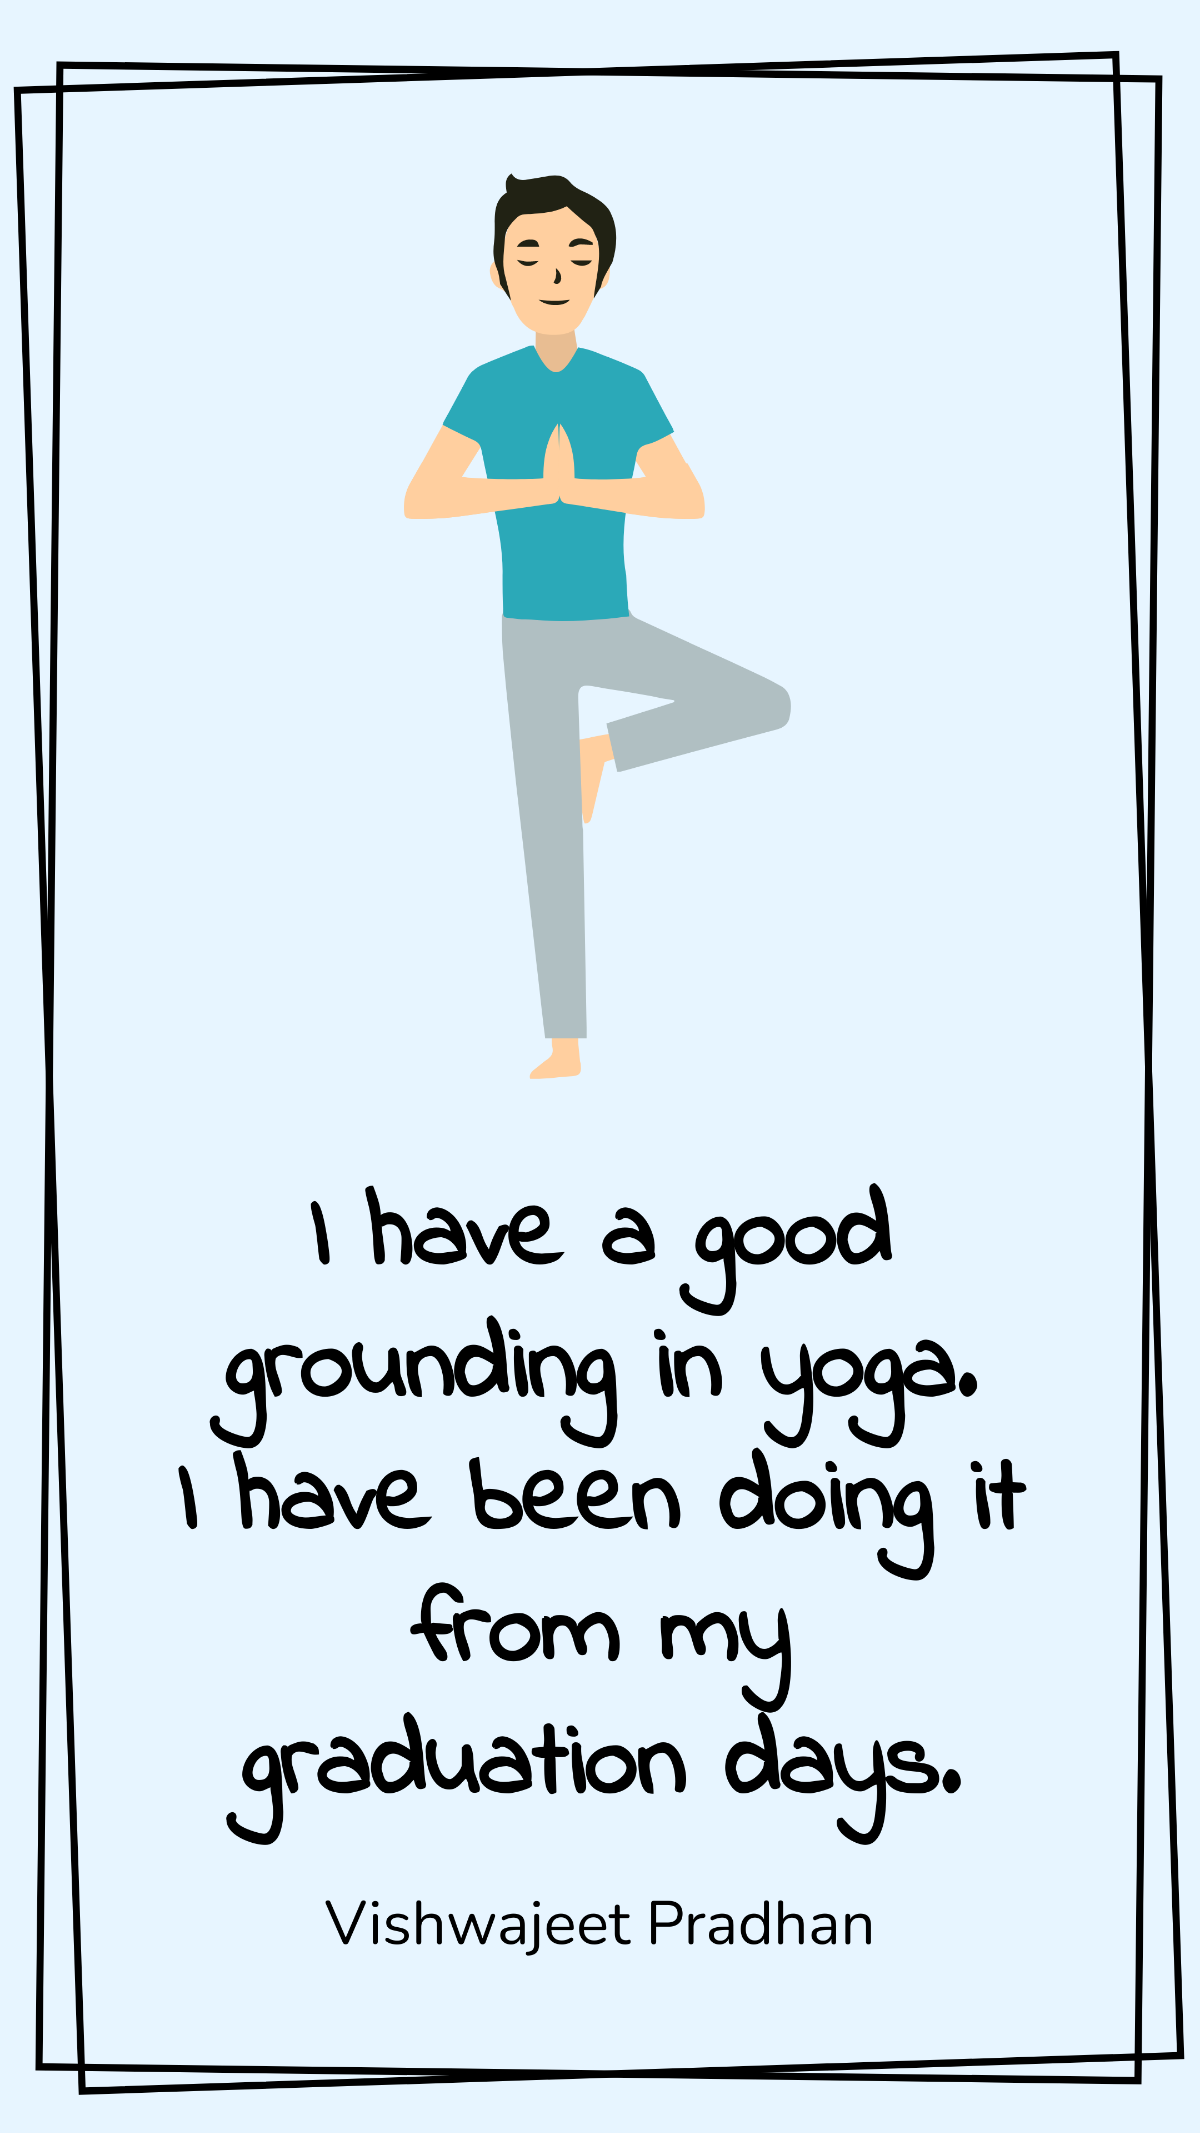 Vishwajeet Pradhan - I have a good grounding in yoga. I have been doing it from my graduation days.